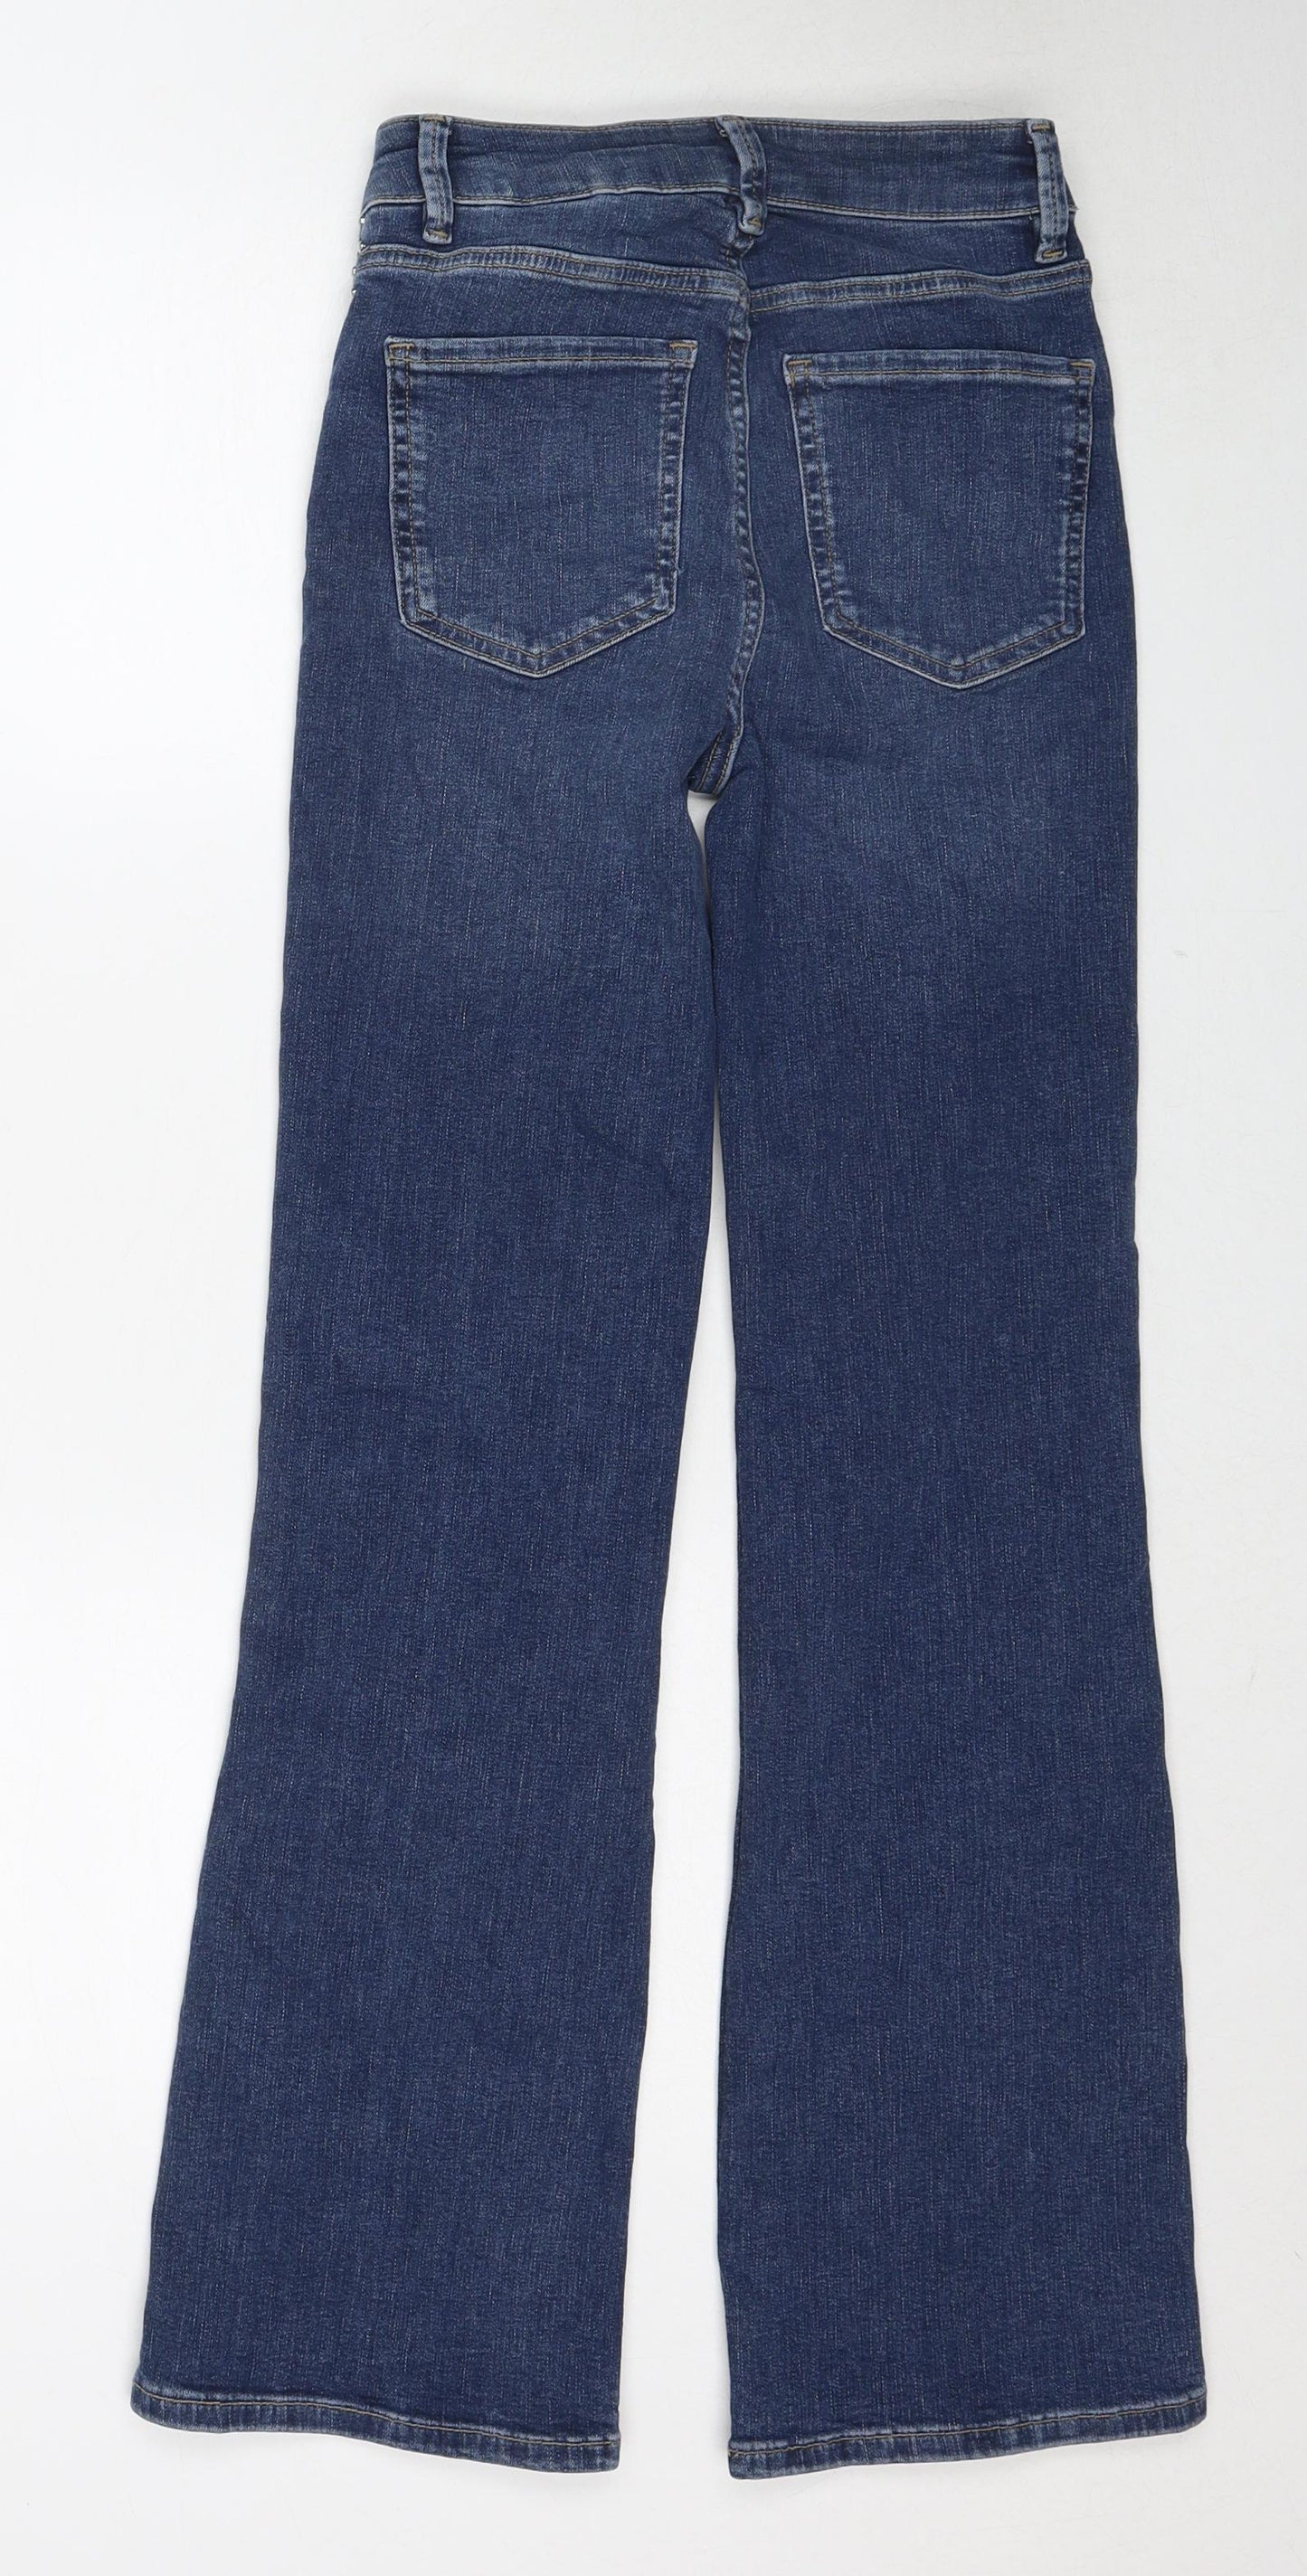 Marks and Spencer Womens Blue Cotton Flared Jeans Size 6 Regular Zip